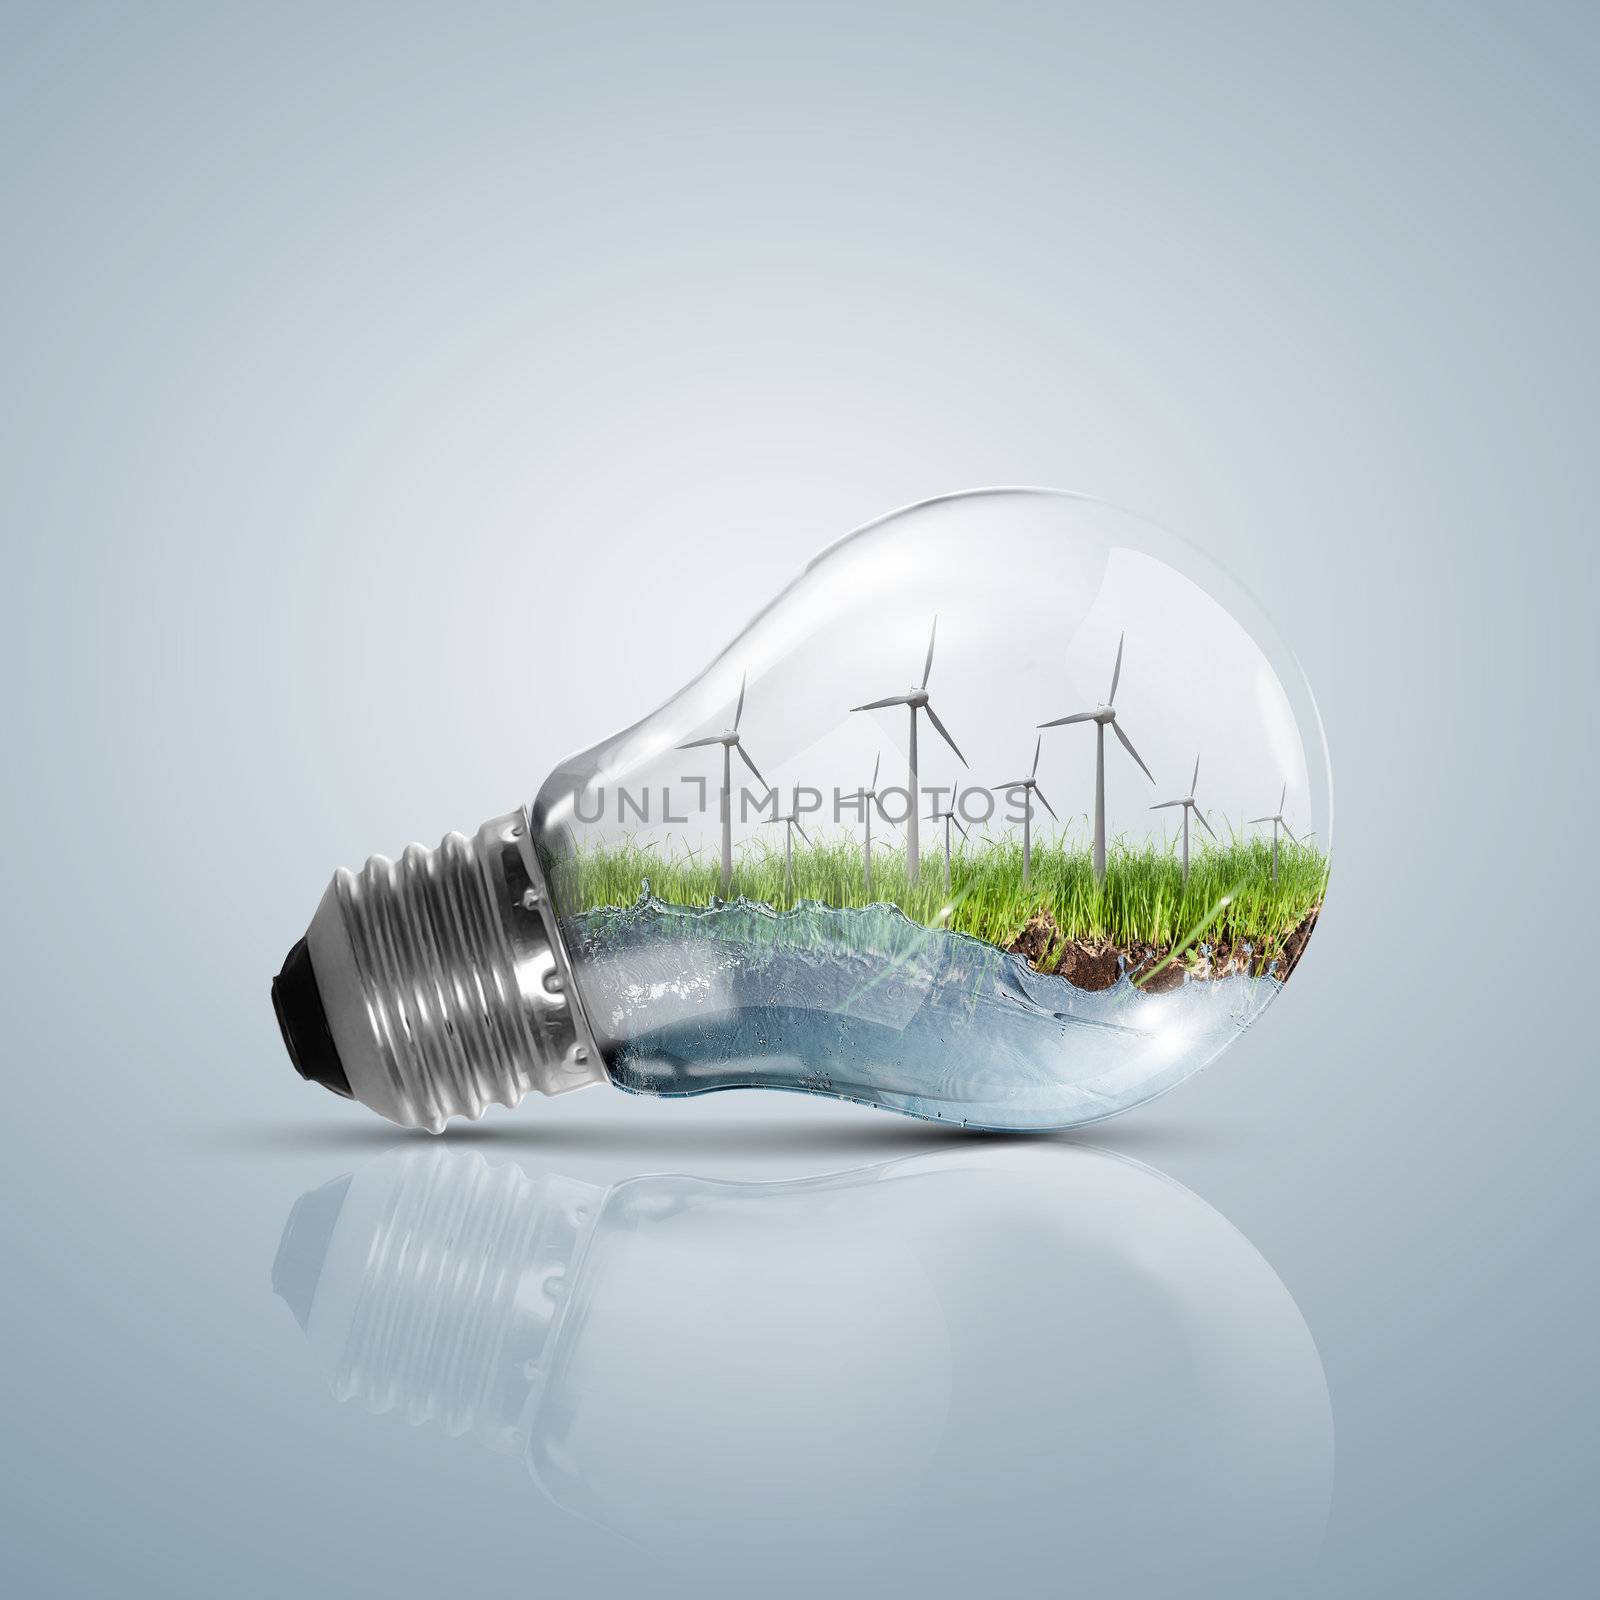 Ecoloy illustration Lamp bulb with clean nature and renewable energy symbol inside